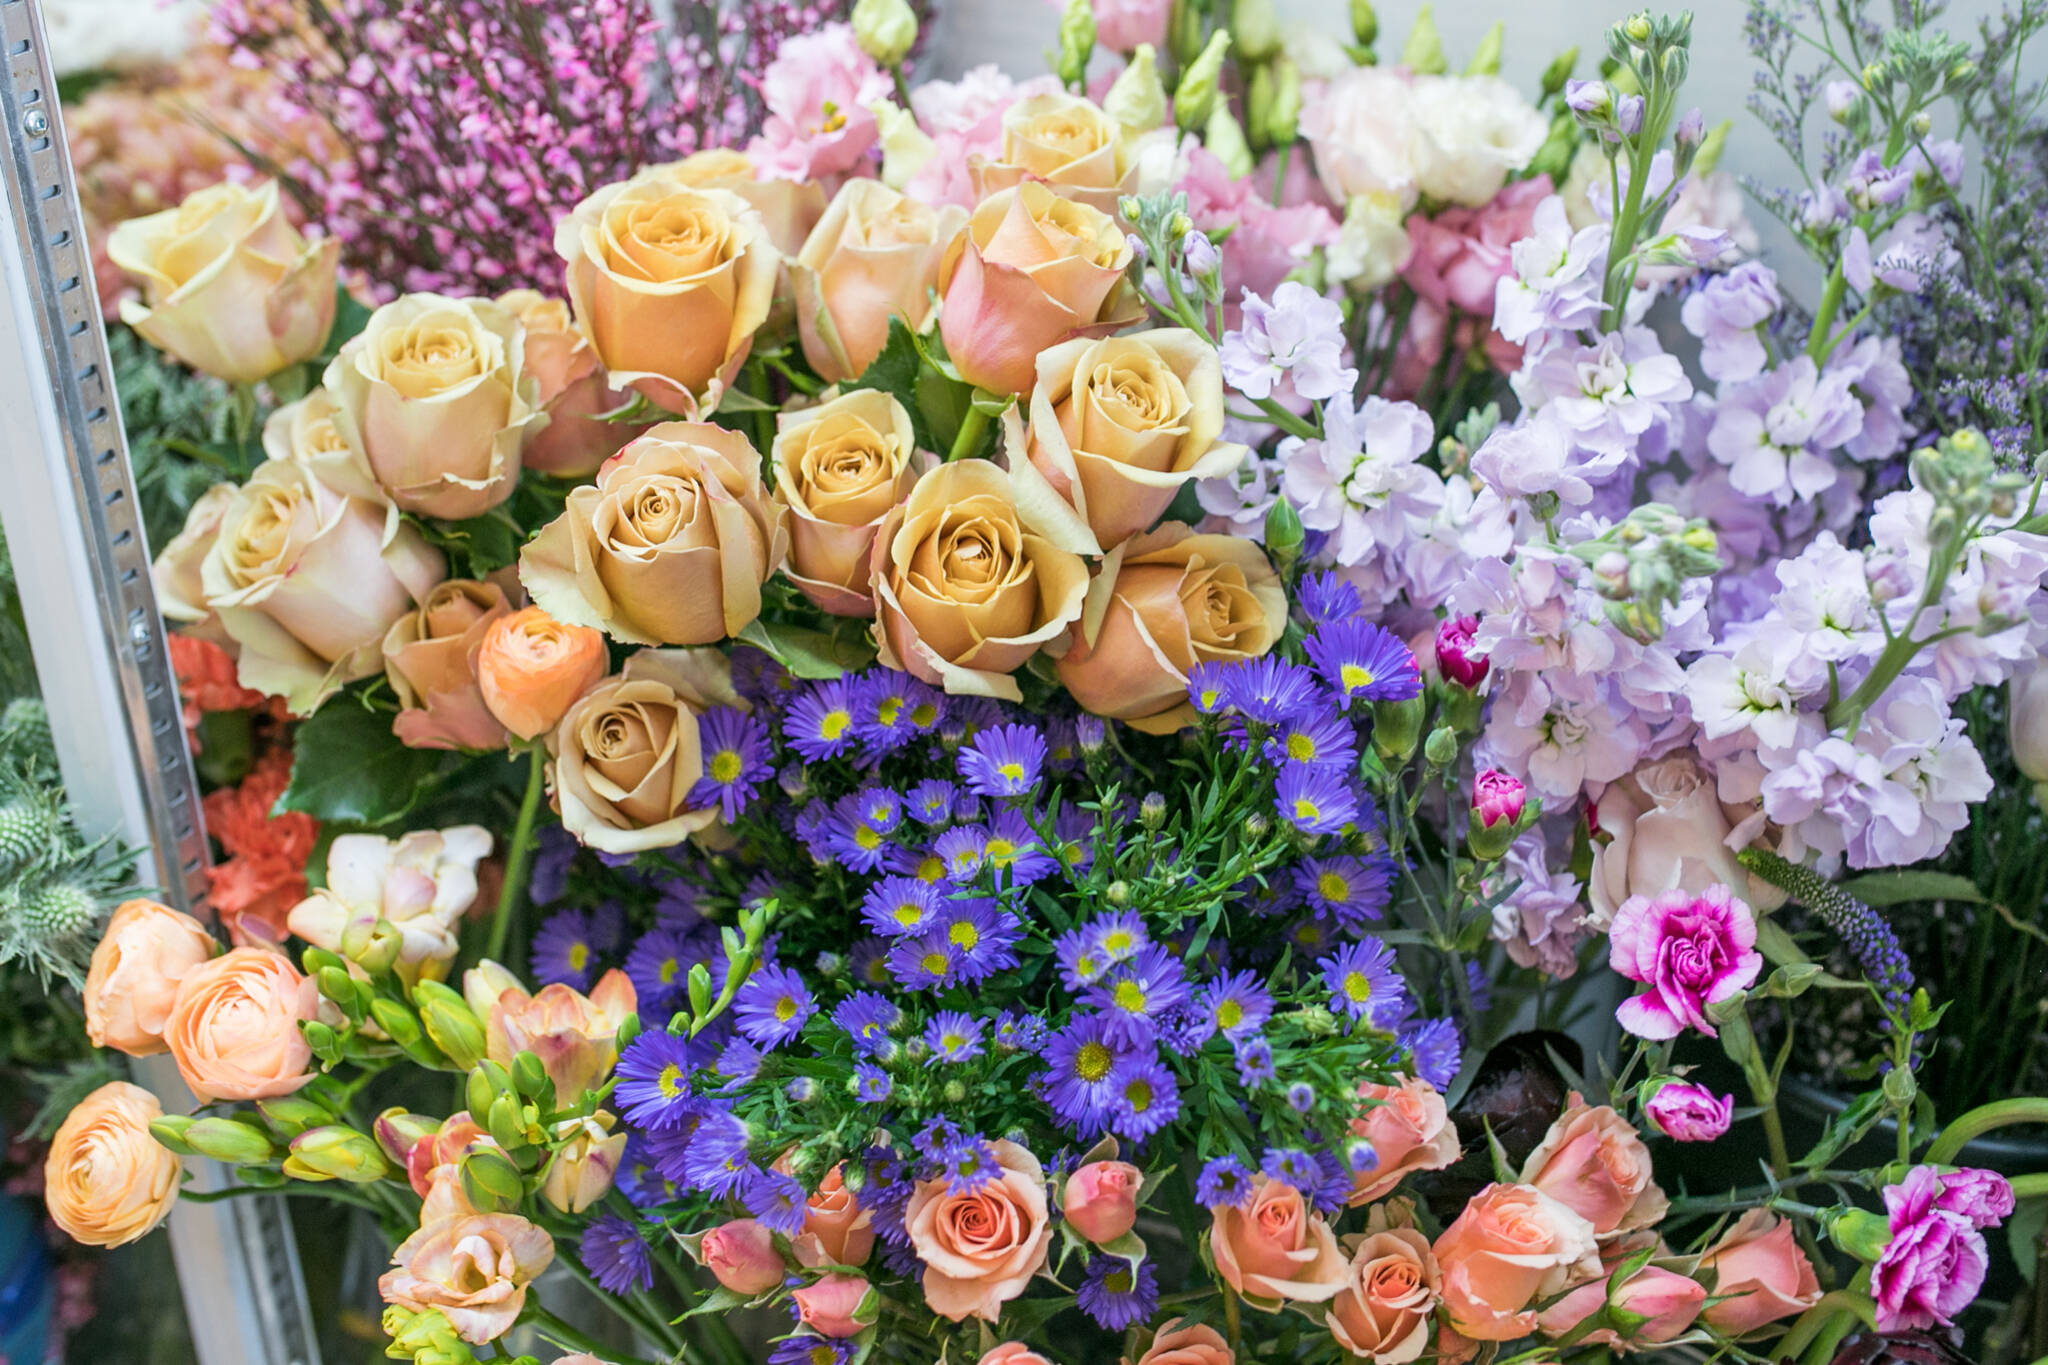 25 flower delivery options in Toronto